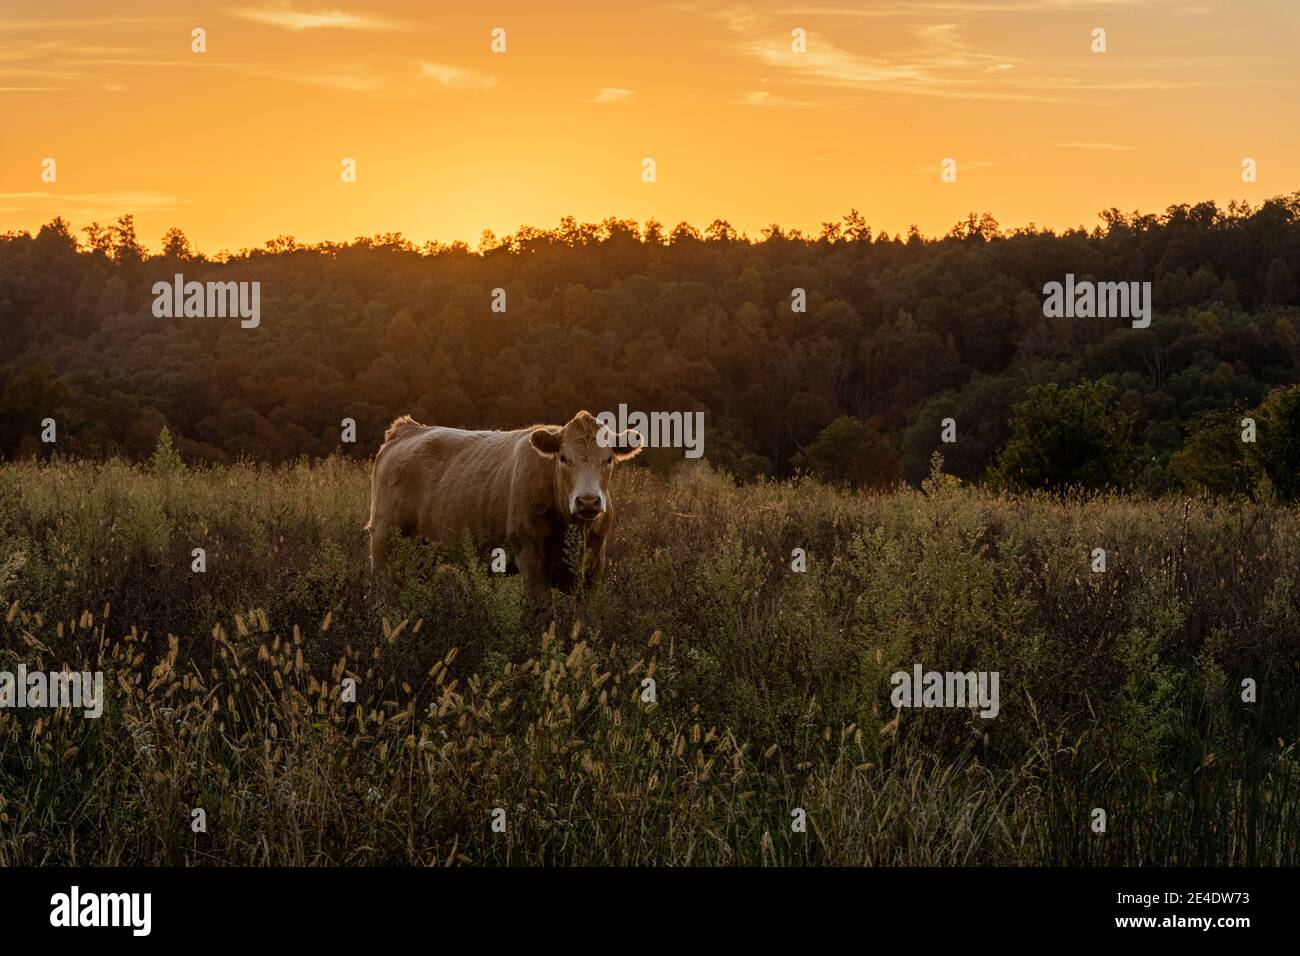 A lone cow stands in a field at sunset. Stock Photo